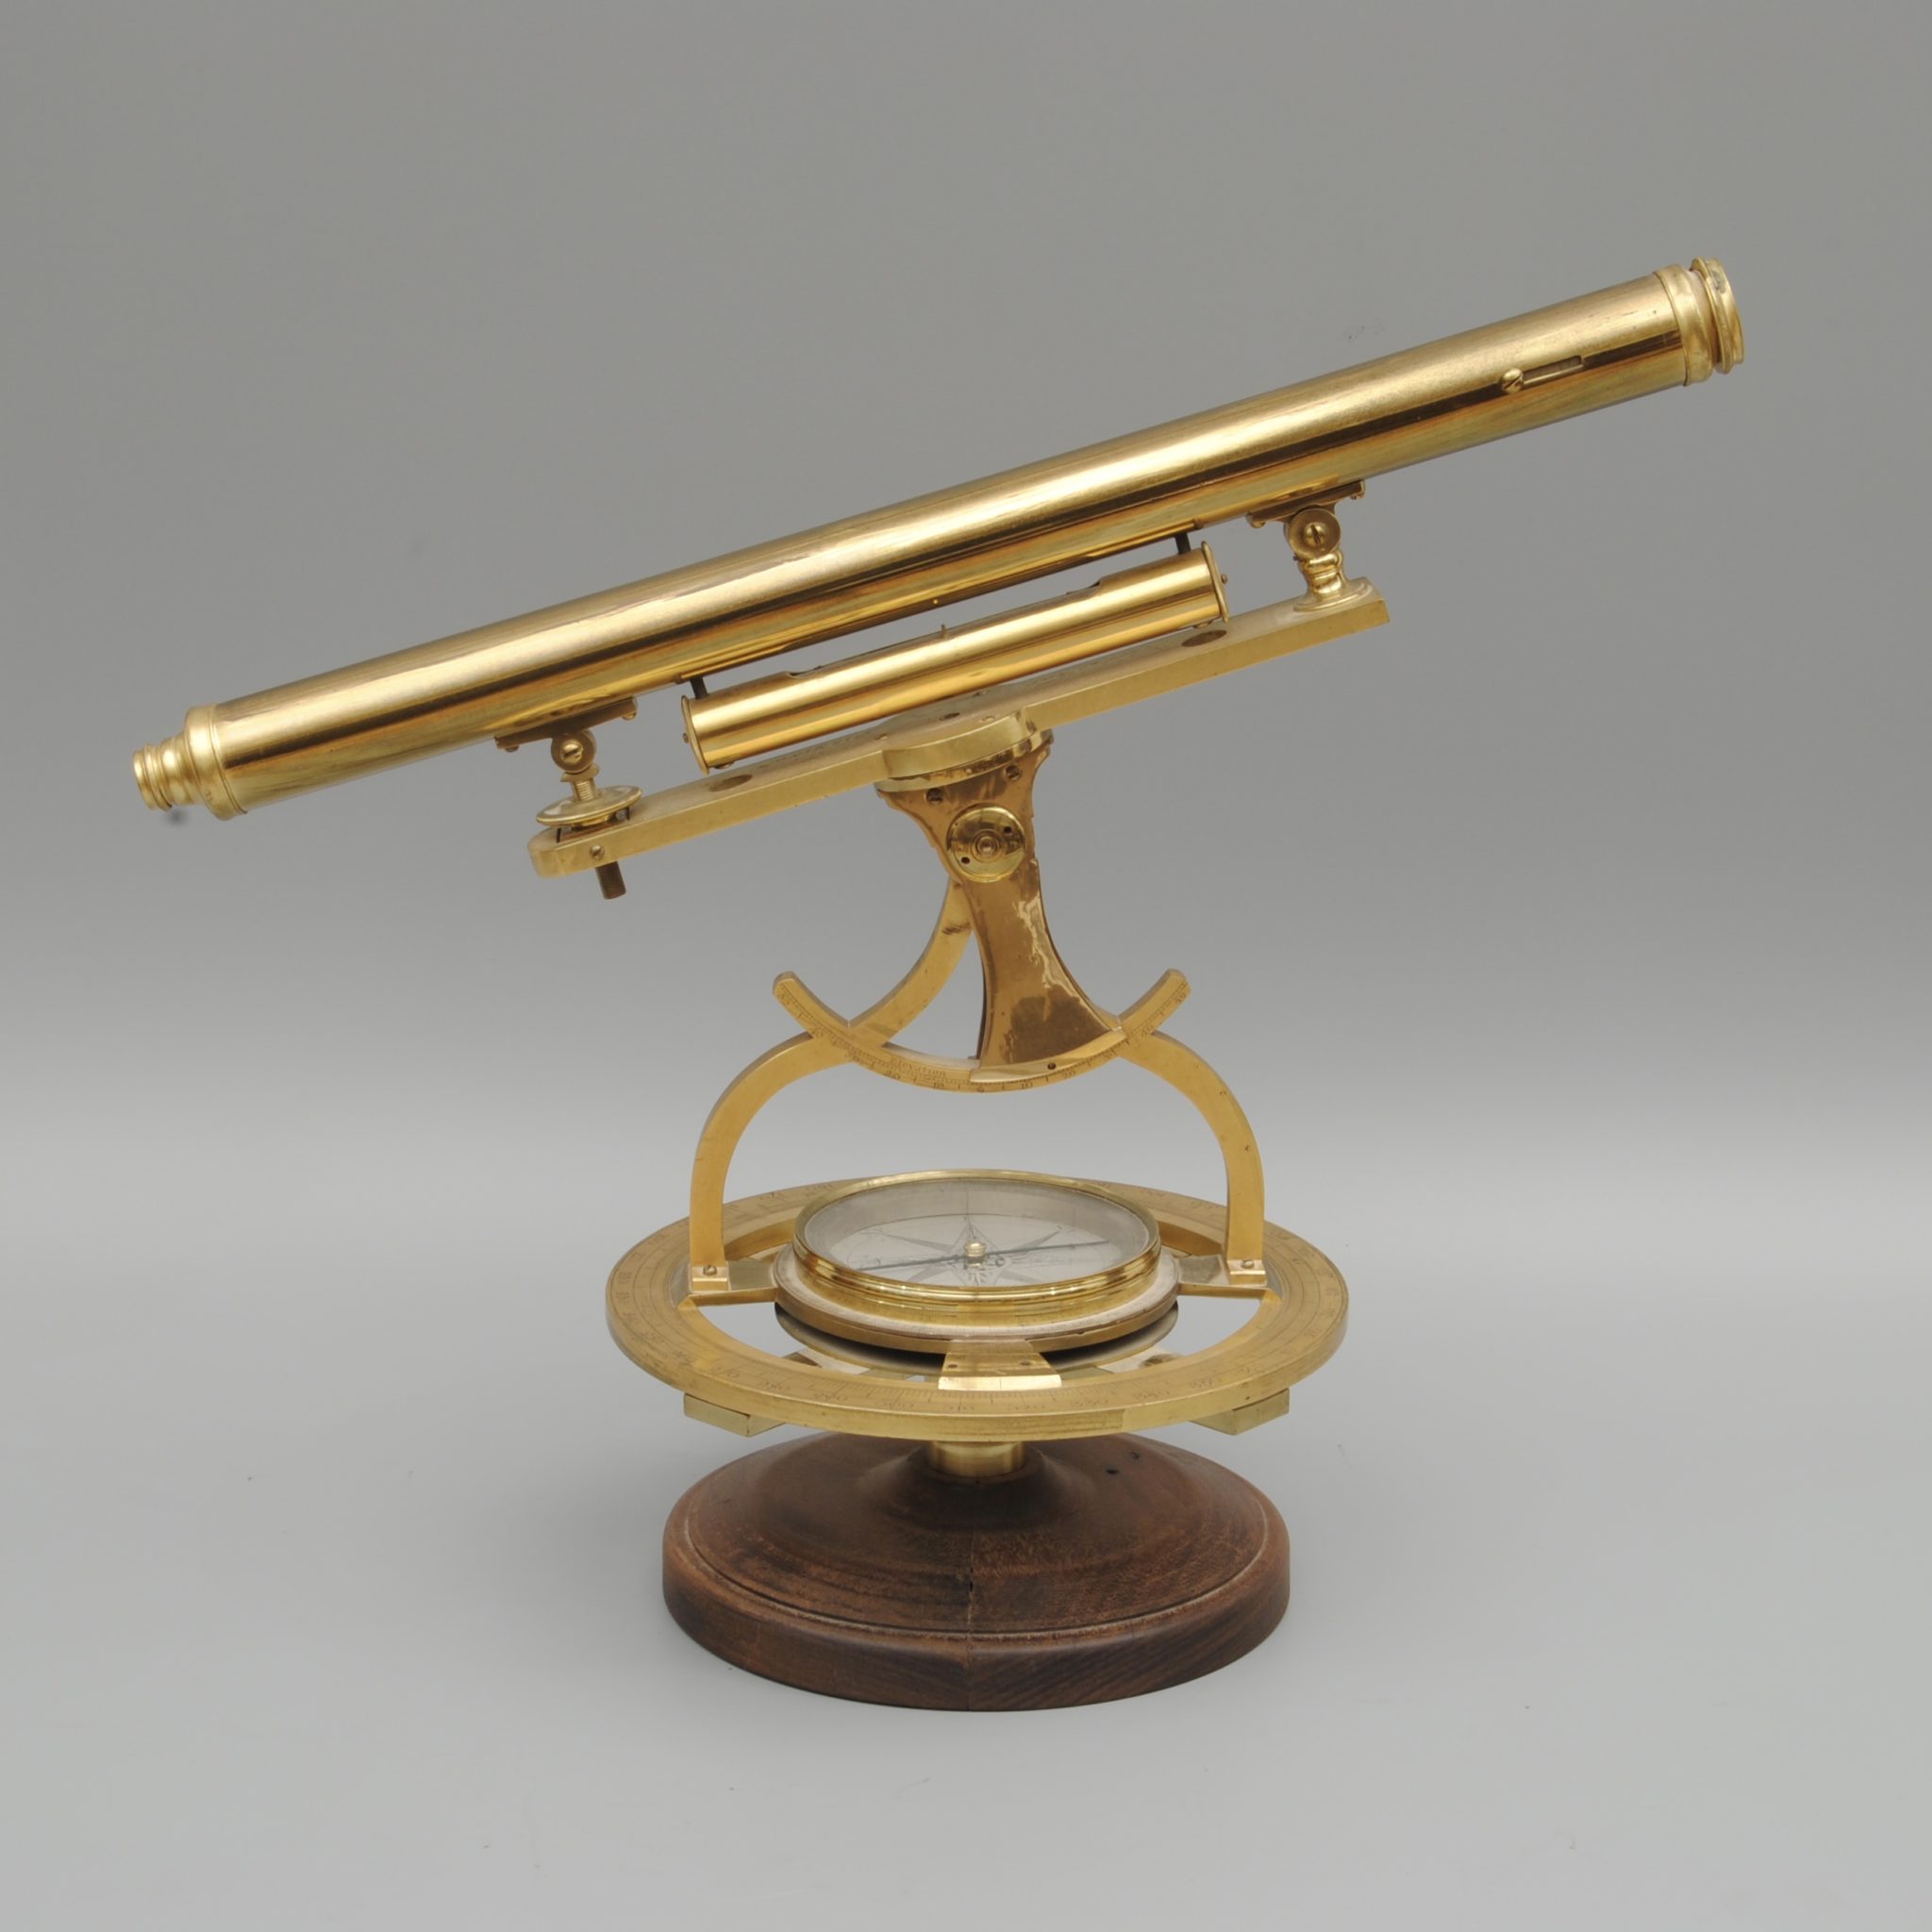 18th century theodolite by Hart, Birmingham of large size